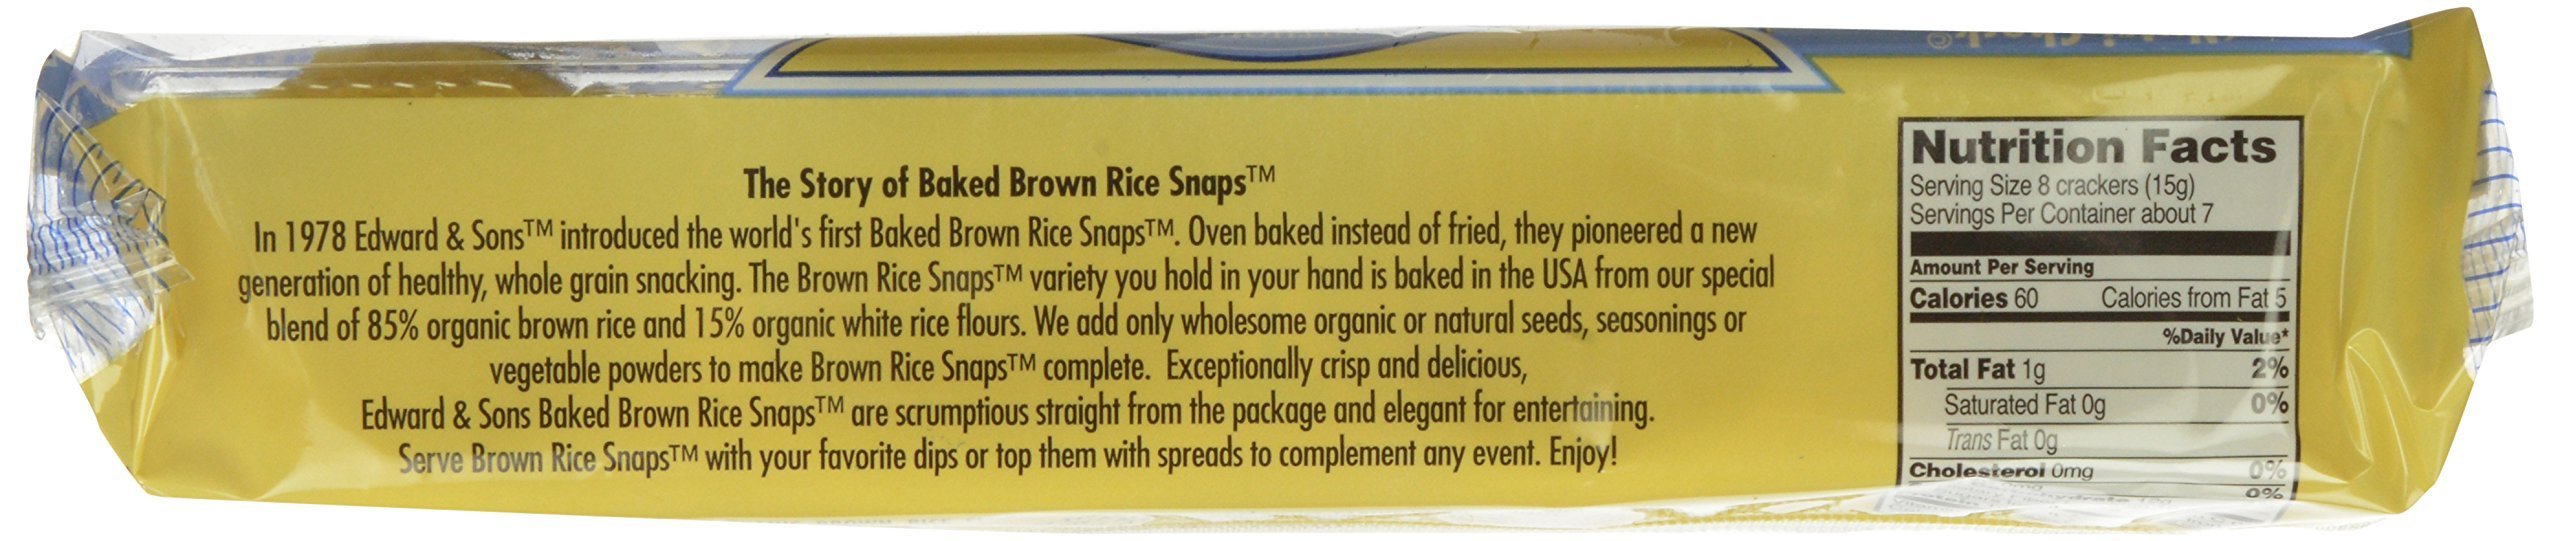 Edward & Sons Edward & Sons Brown Rice Snaps, Unsalted Plain with Organic Brown Rice, 3.5 Ounce Packs (Pack of 12) 3.5 oz - $36.95